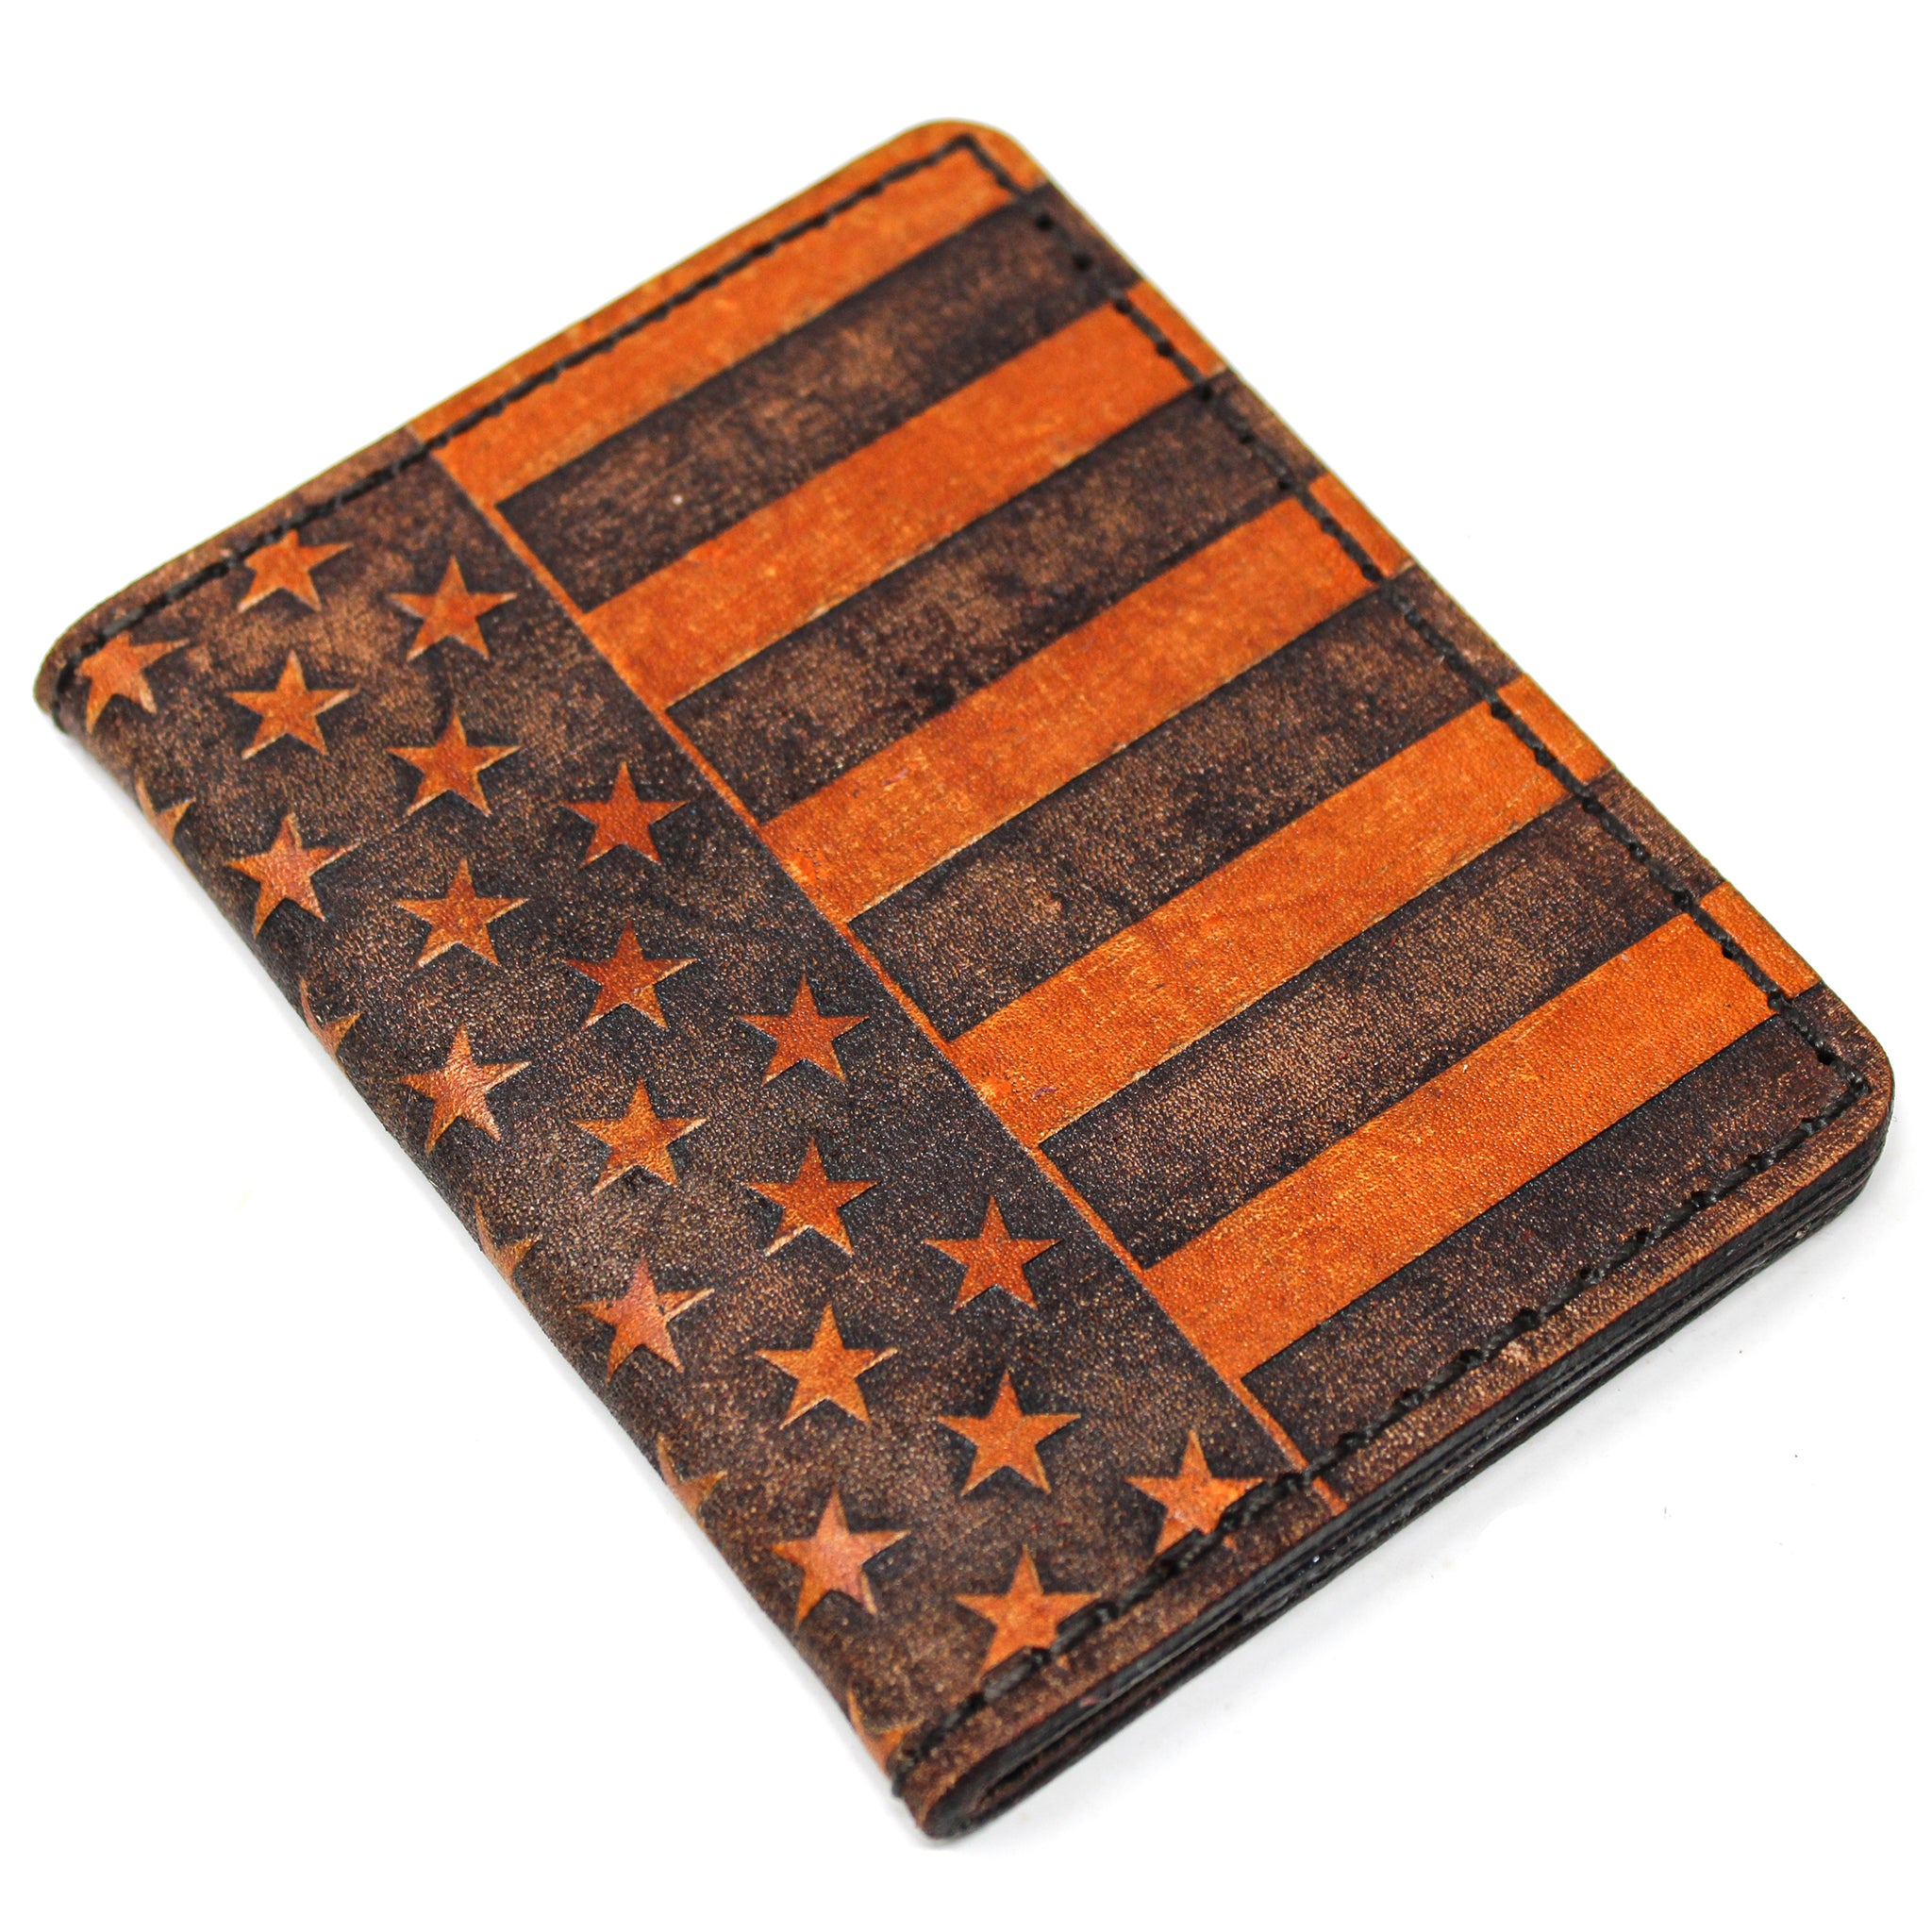 Leather Wallet - Stars and Bars